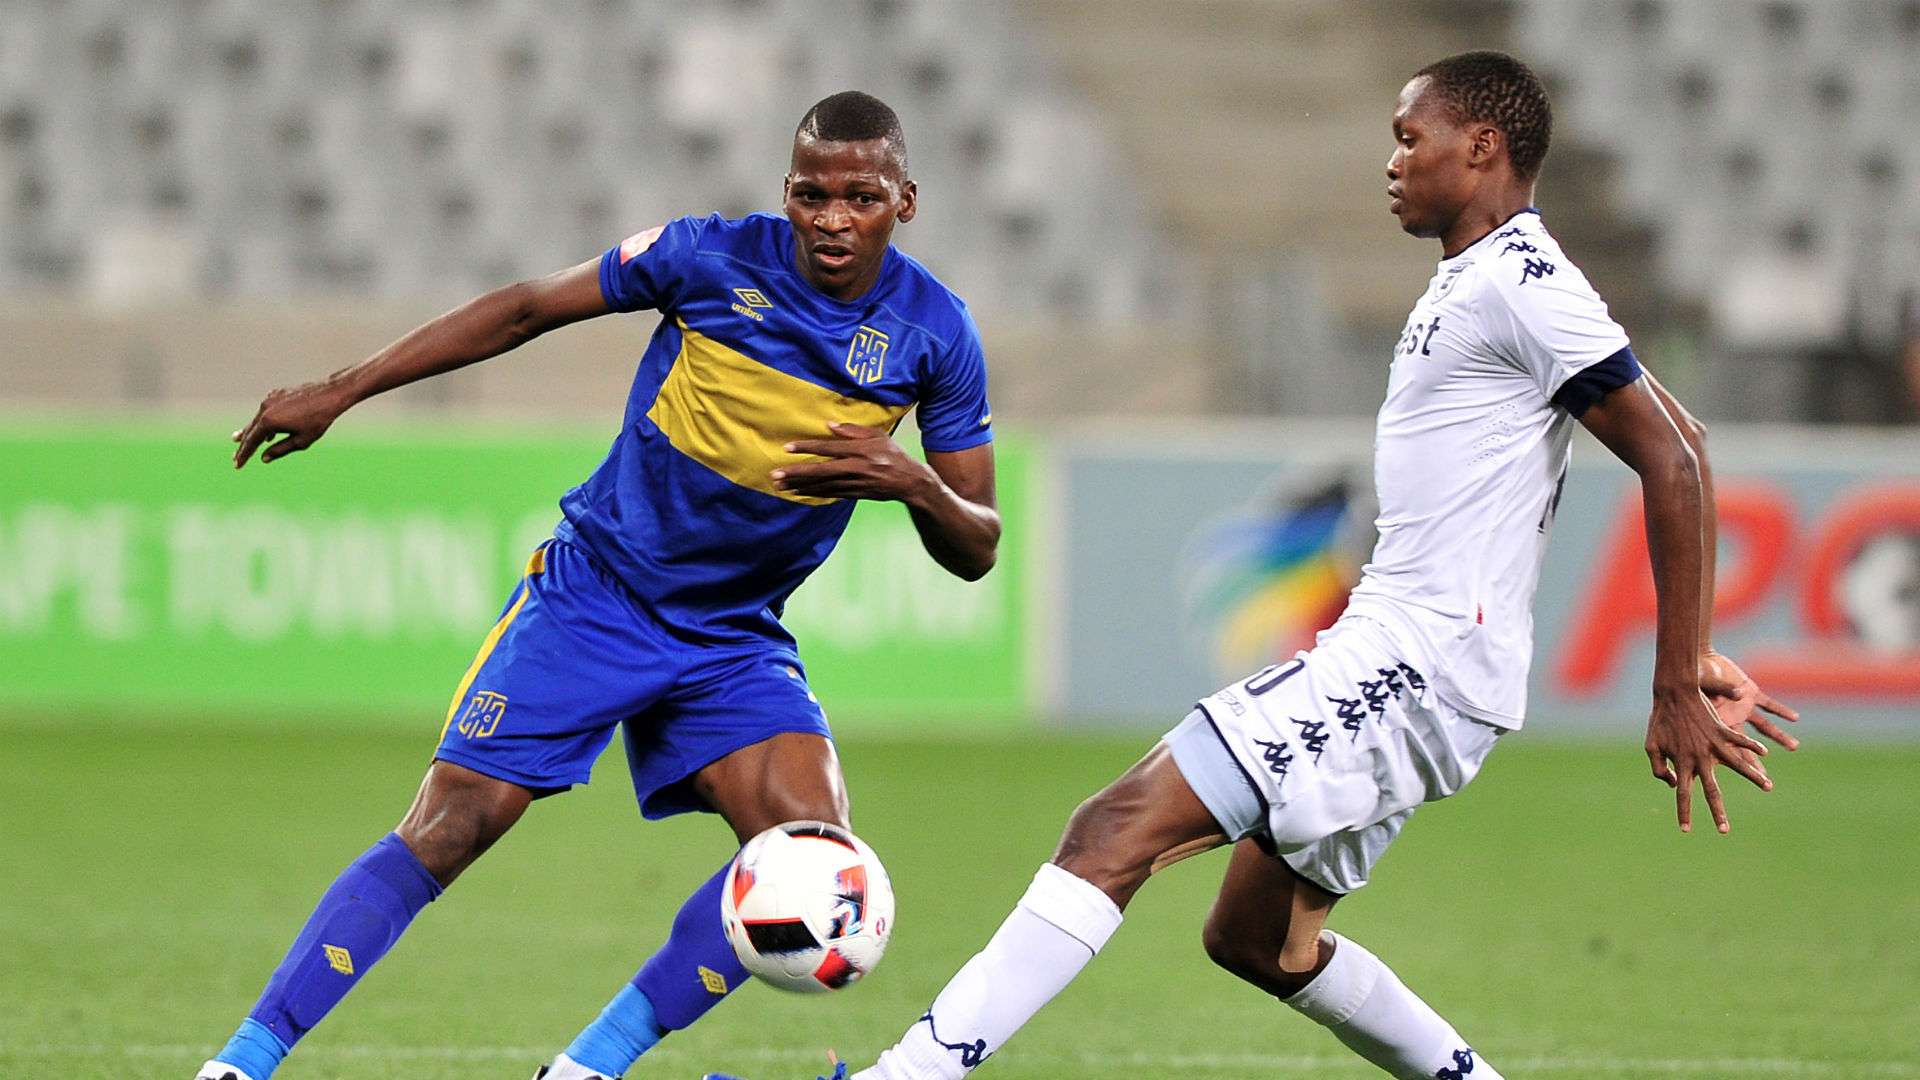 Thamsanqa Mkhize of Cape Town City FC evades challenge from Mokgakolodi Ngele of Bidvest Wits